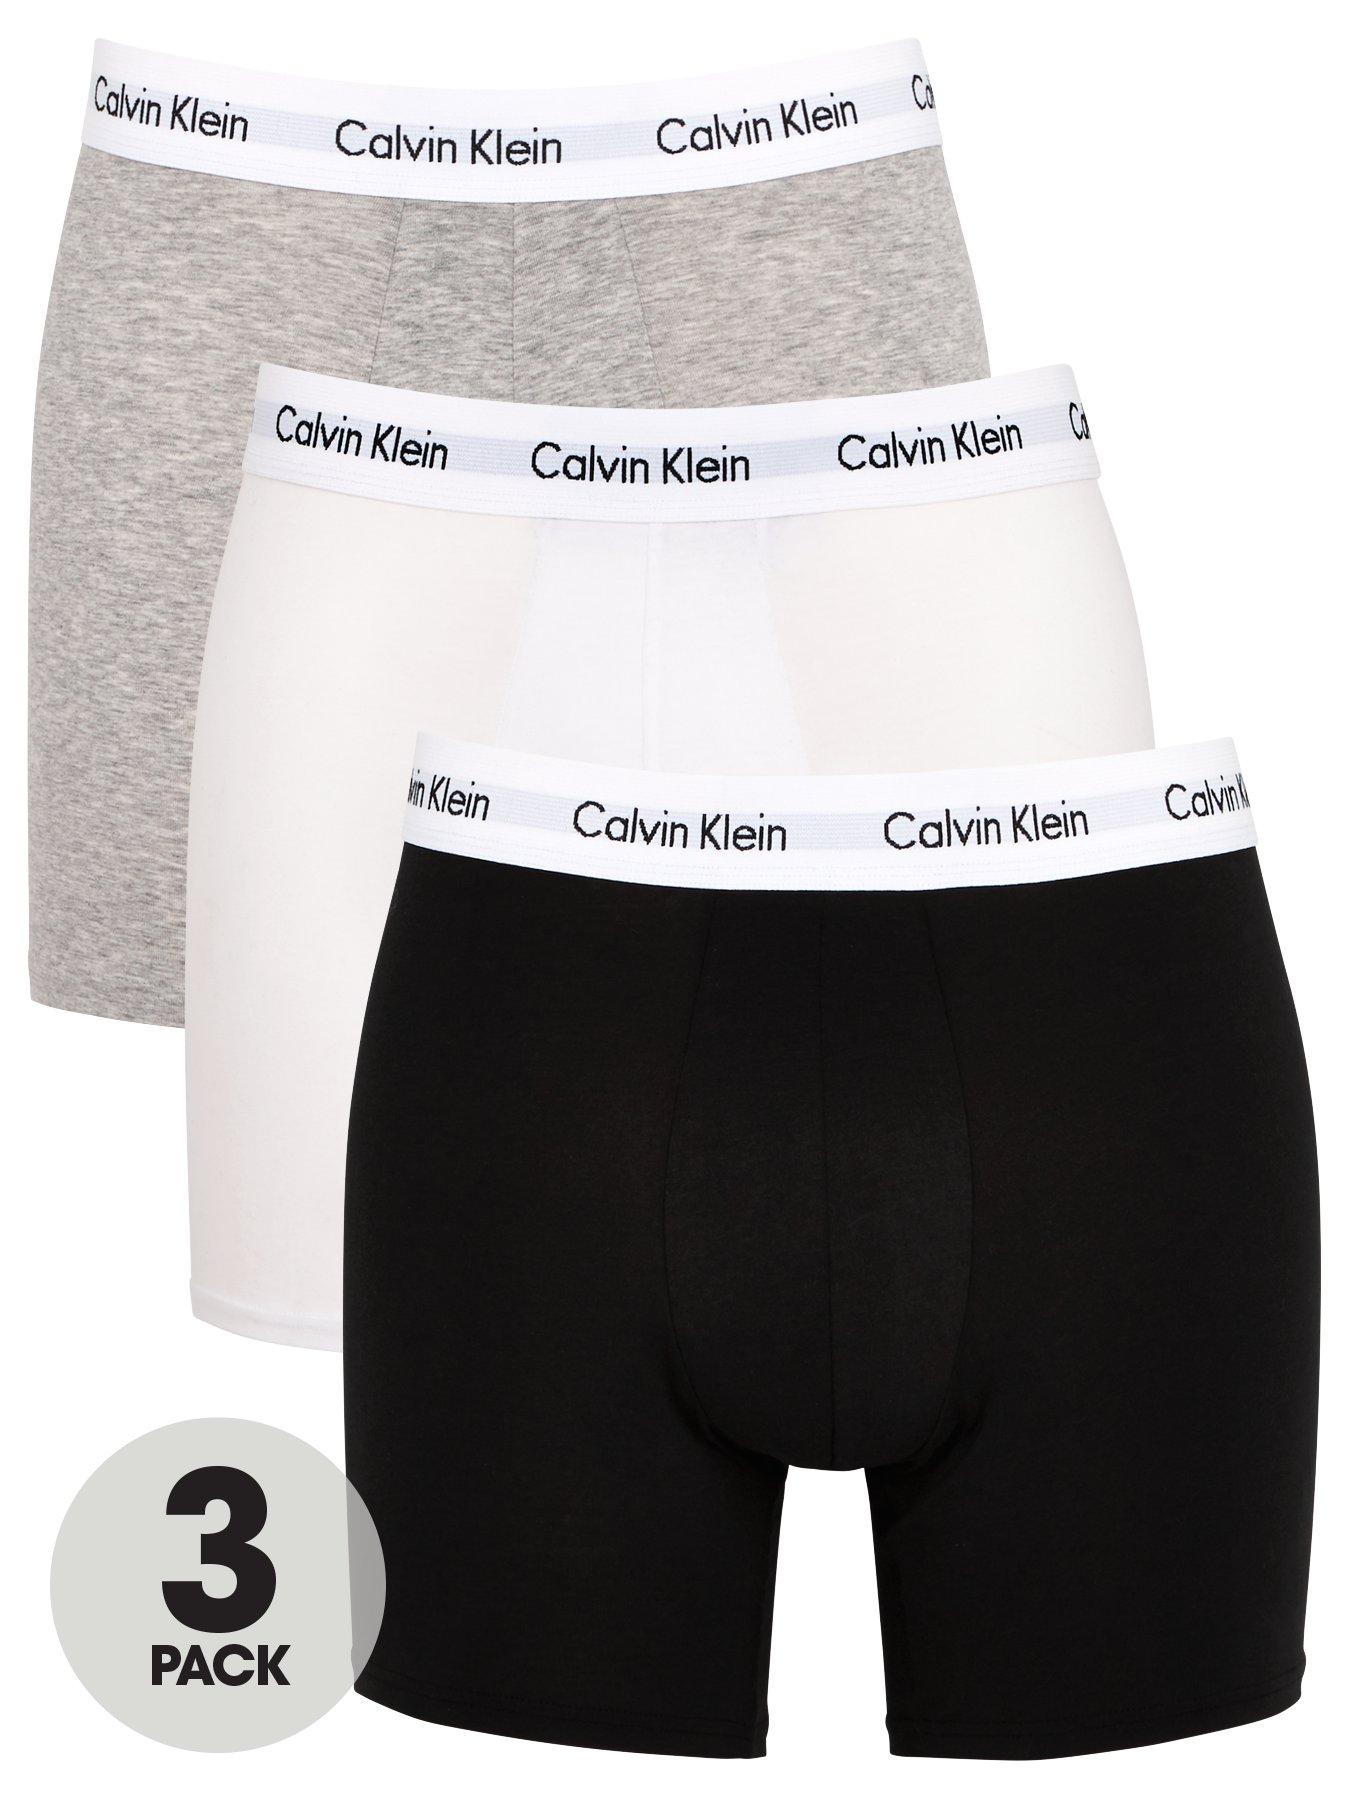  Calvin Klein Boys' Briefs Underwear – 6 Pack Stretch Cotton  Briefs – Soft Tag Free Underwear for Boys (XS-XL), Size Small,  Black/Heather Grey/High Red: Clothing, Shoes & Jewelry